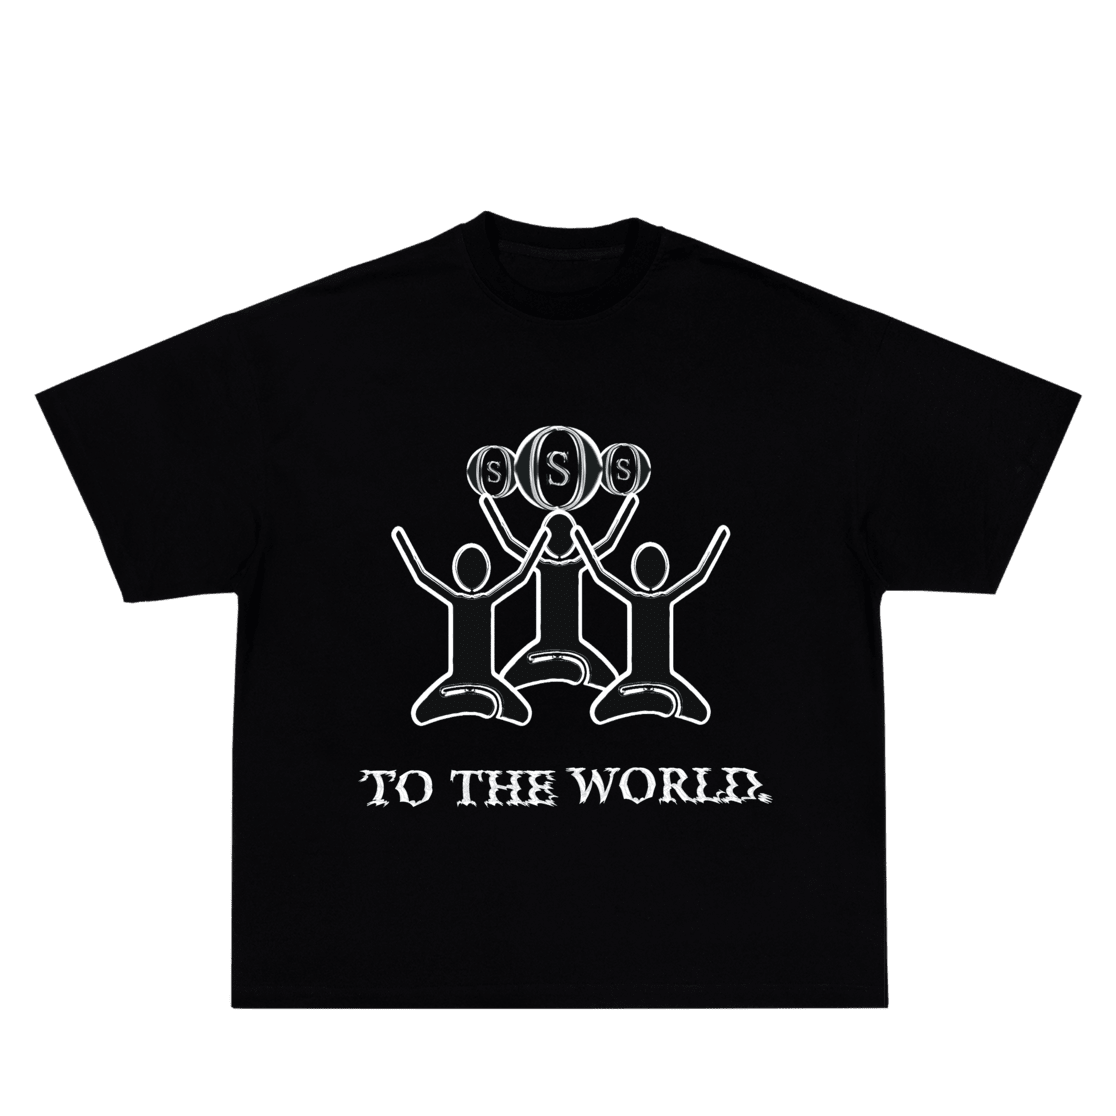 TO THE WORLD TEE